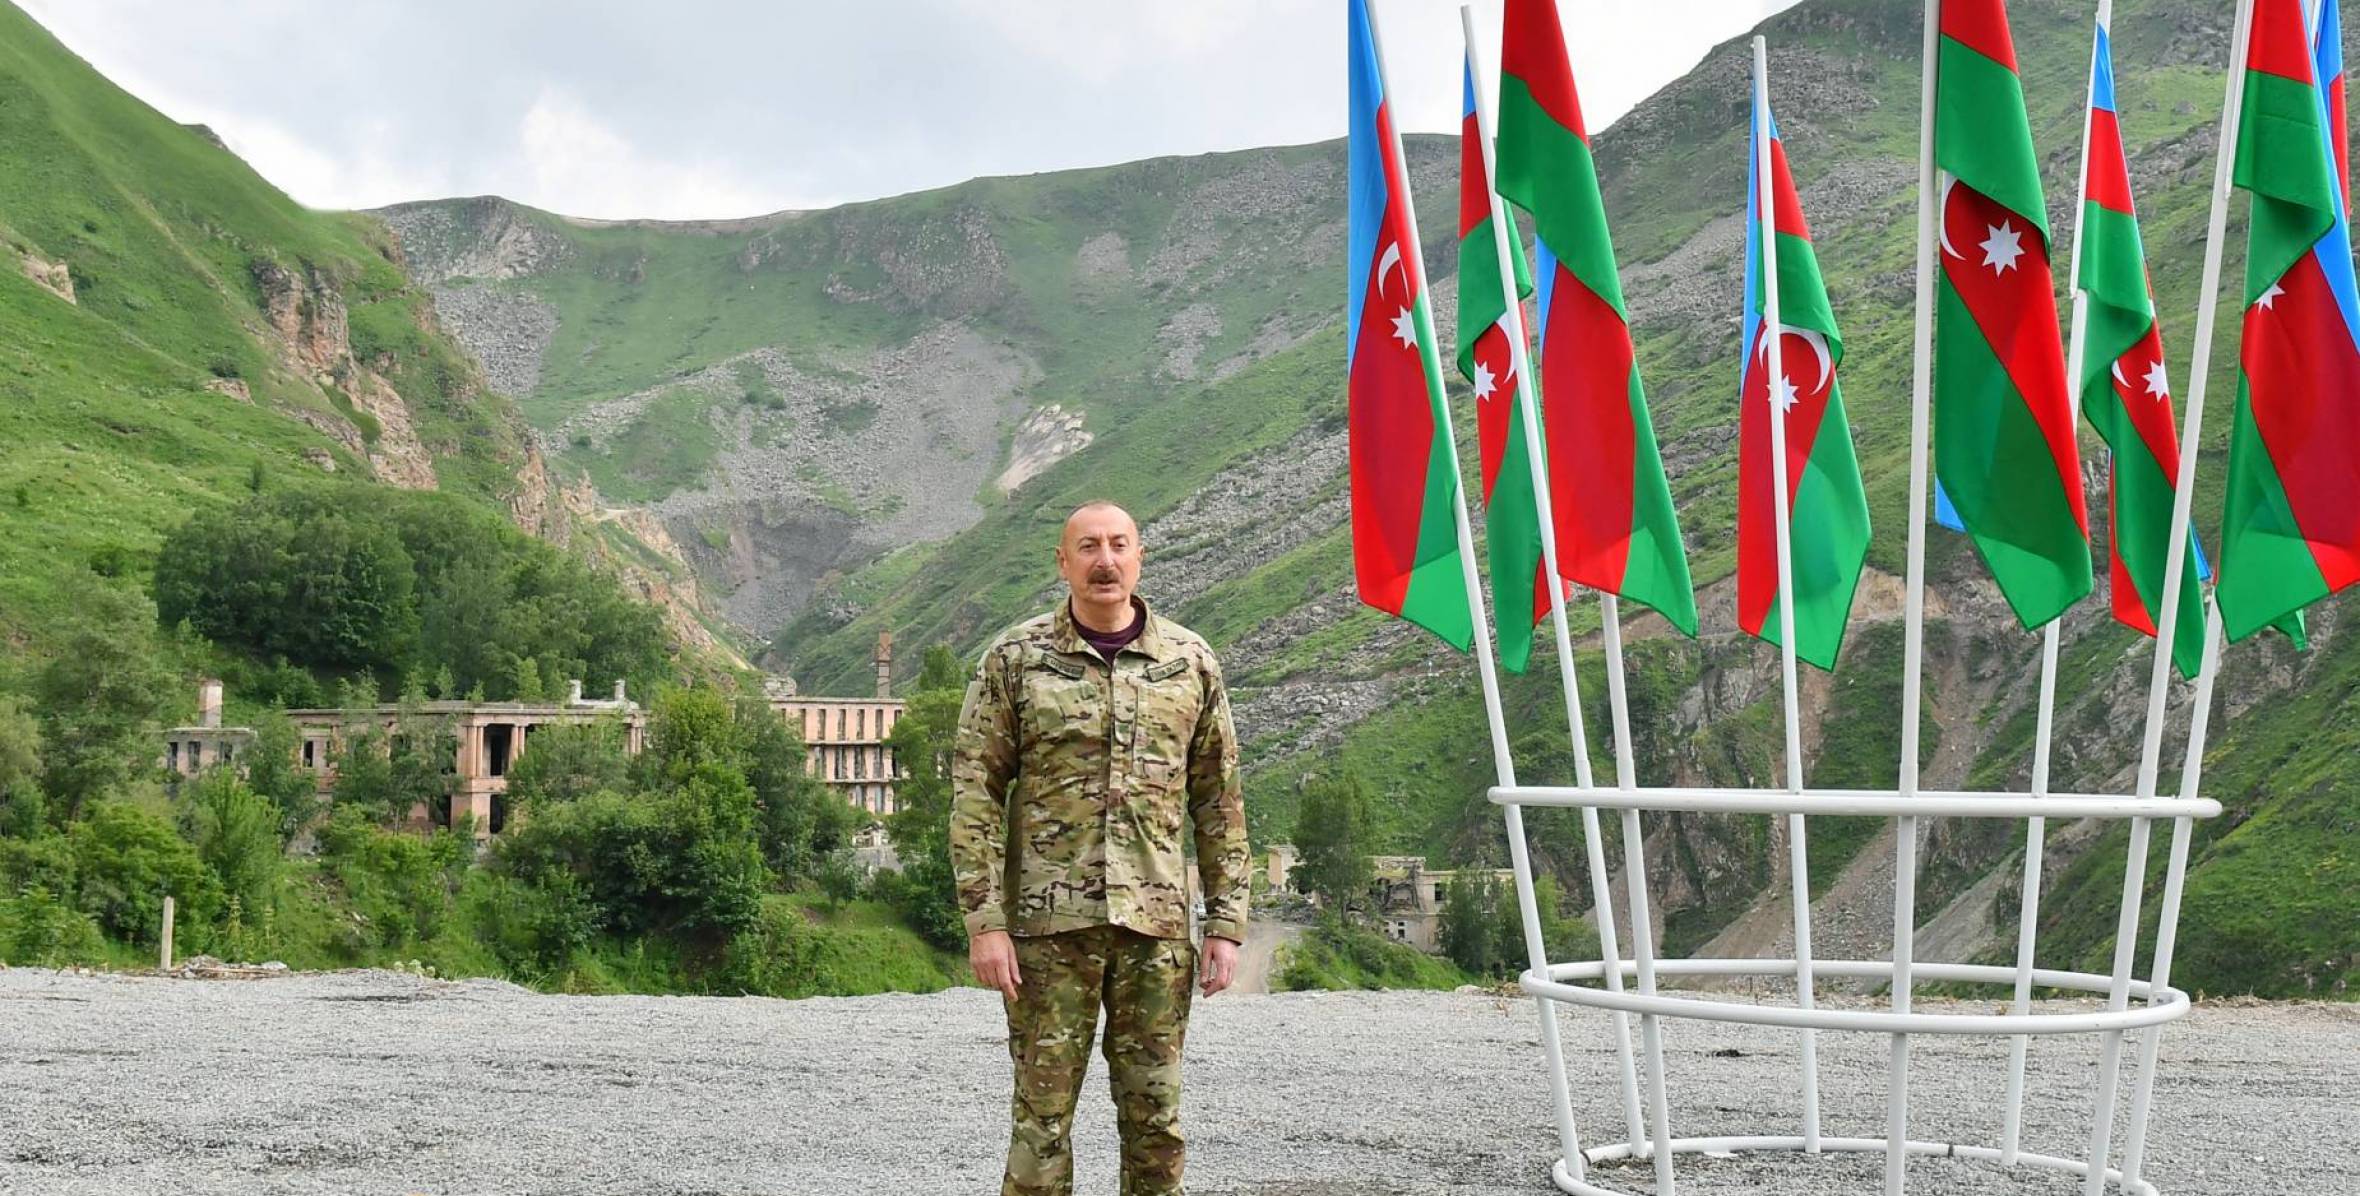 Speech by Ilham Aliyev at the opening ceremony of military unit in Kalbajar district